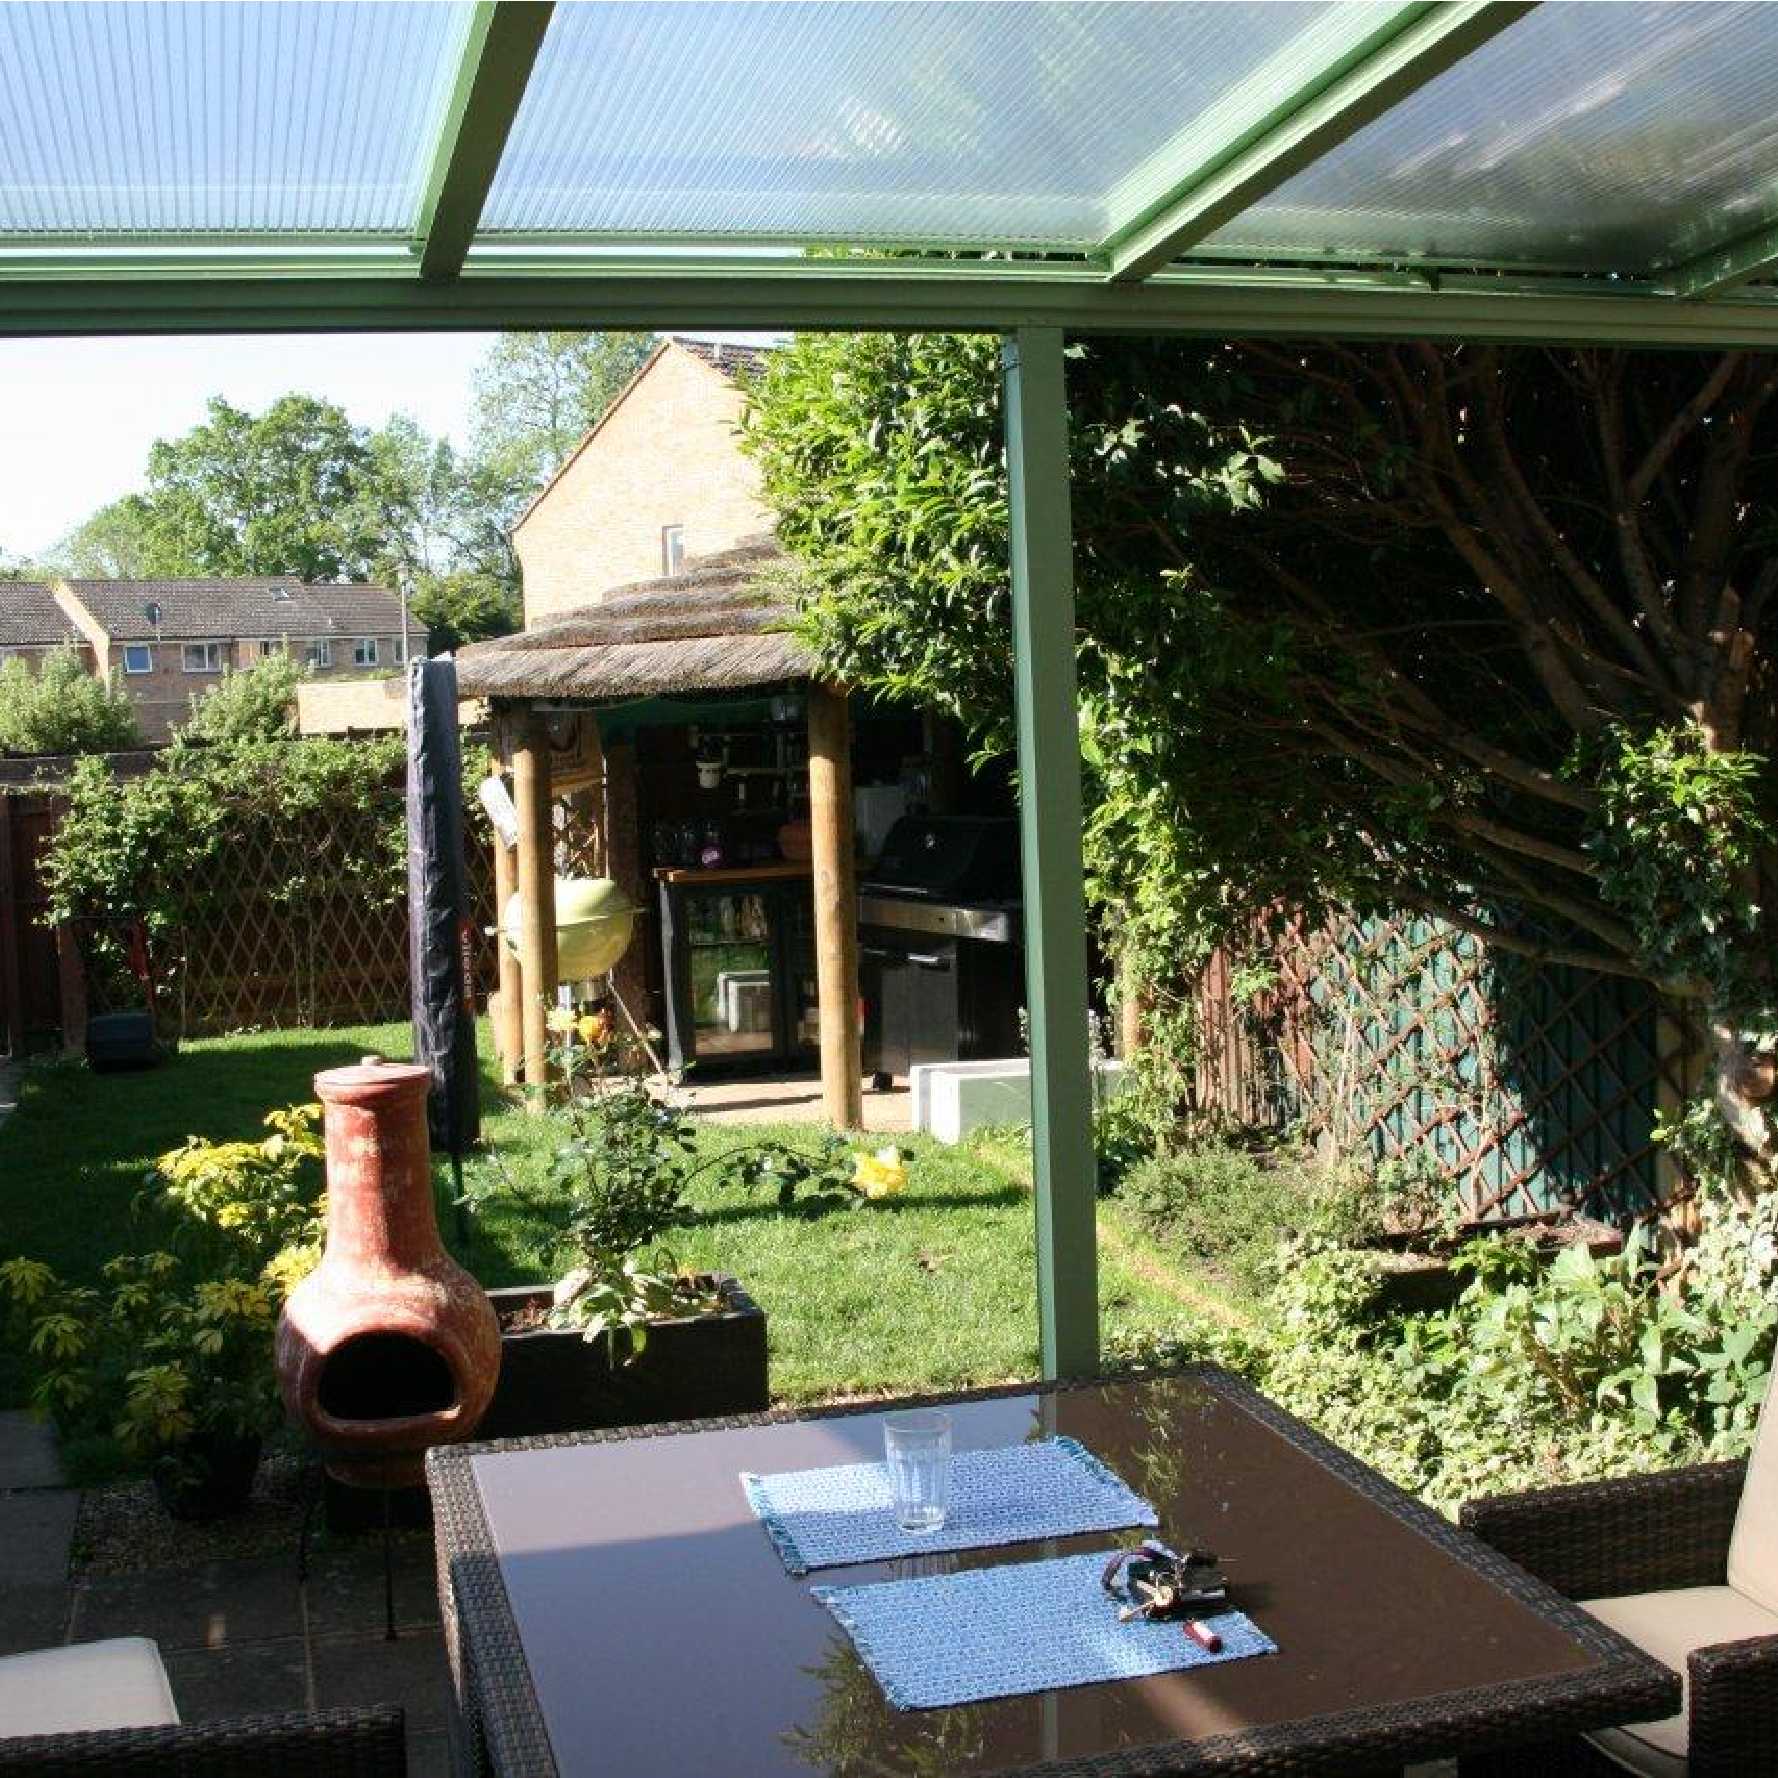 Affordable Omega Smart Lean-To Canopy, White with 16mm Polycarbonate Glazing - 6.3m (W) x 1.5m (P), (4) Supporting Posts